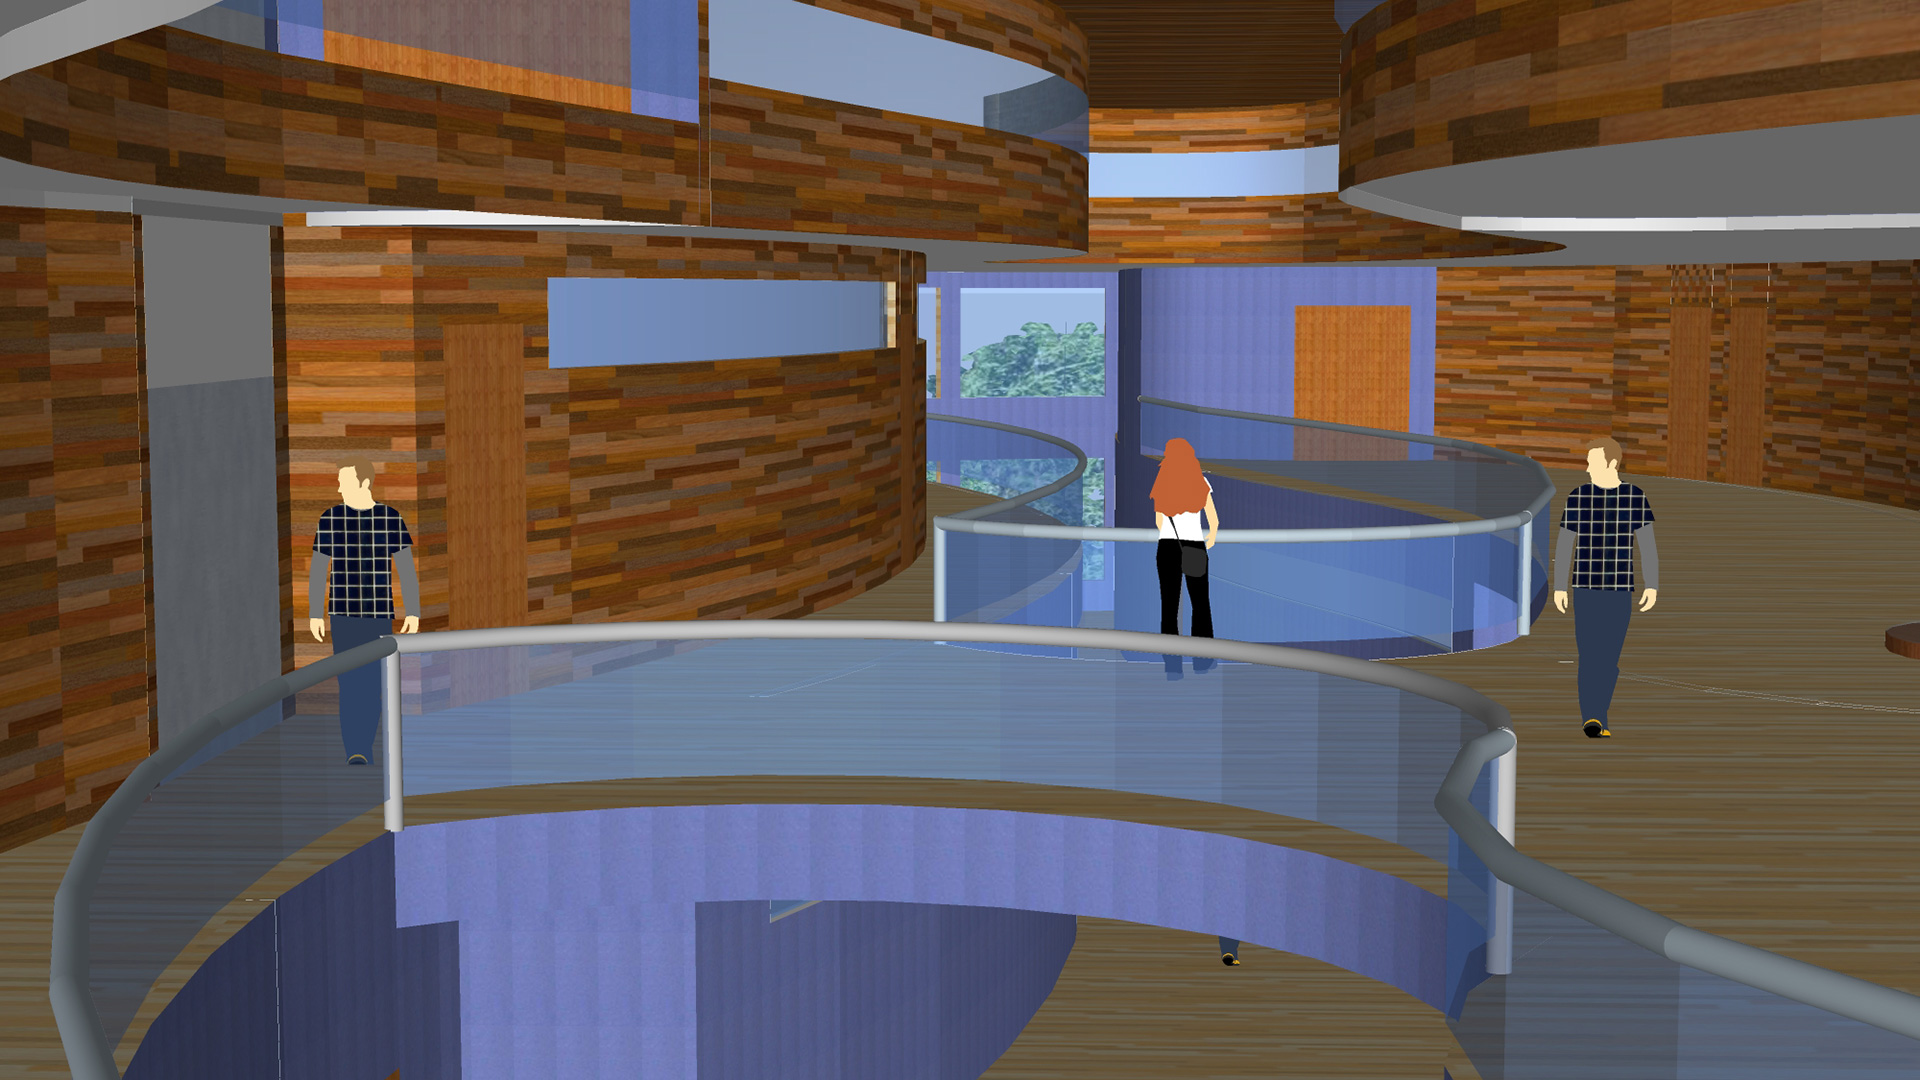 Render of interior with exposed wood and blue glass, with curving walkways and mezzanines at second and third story.